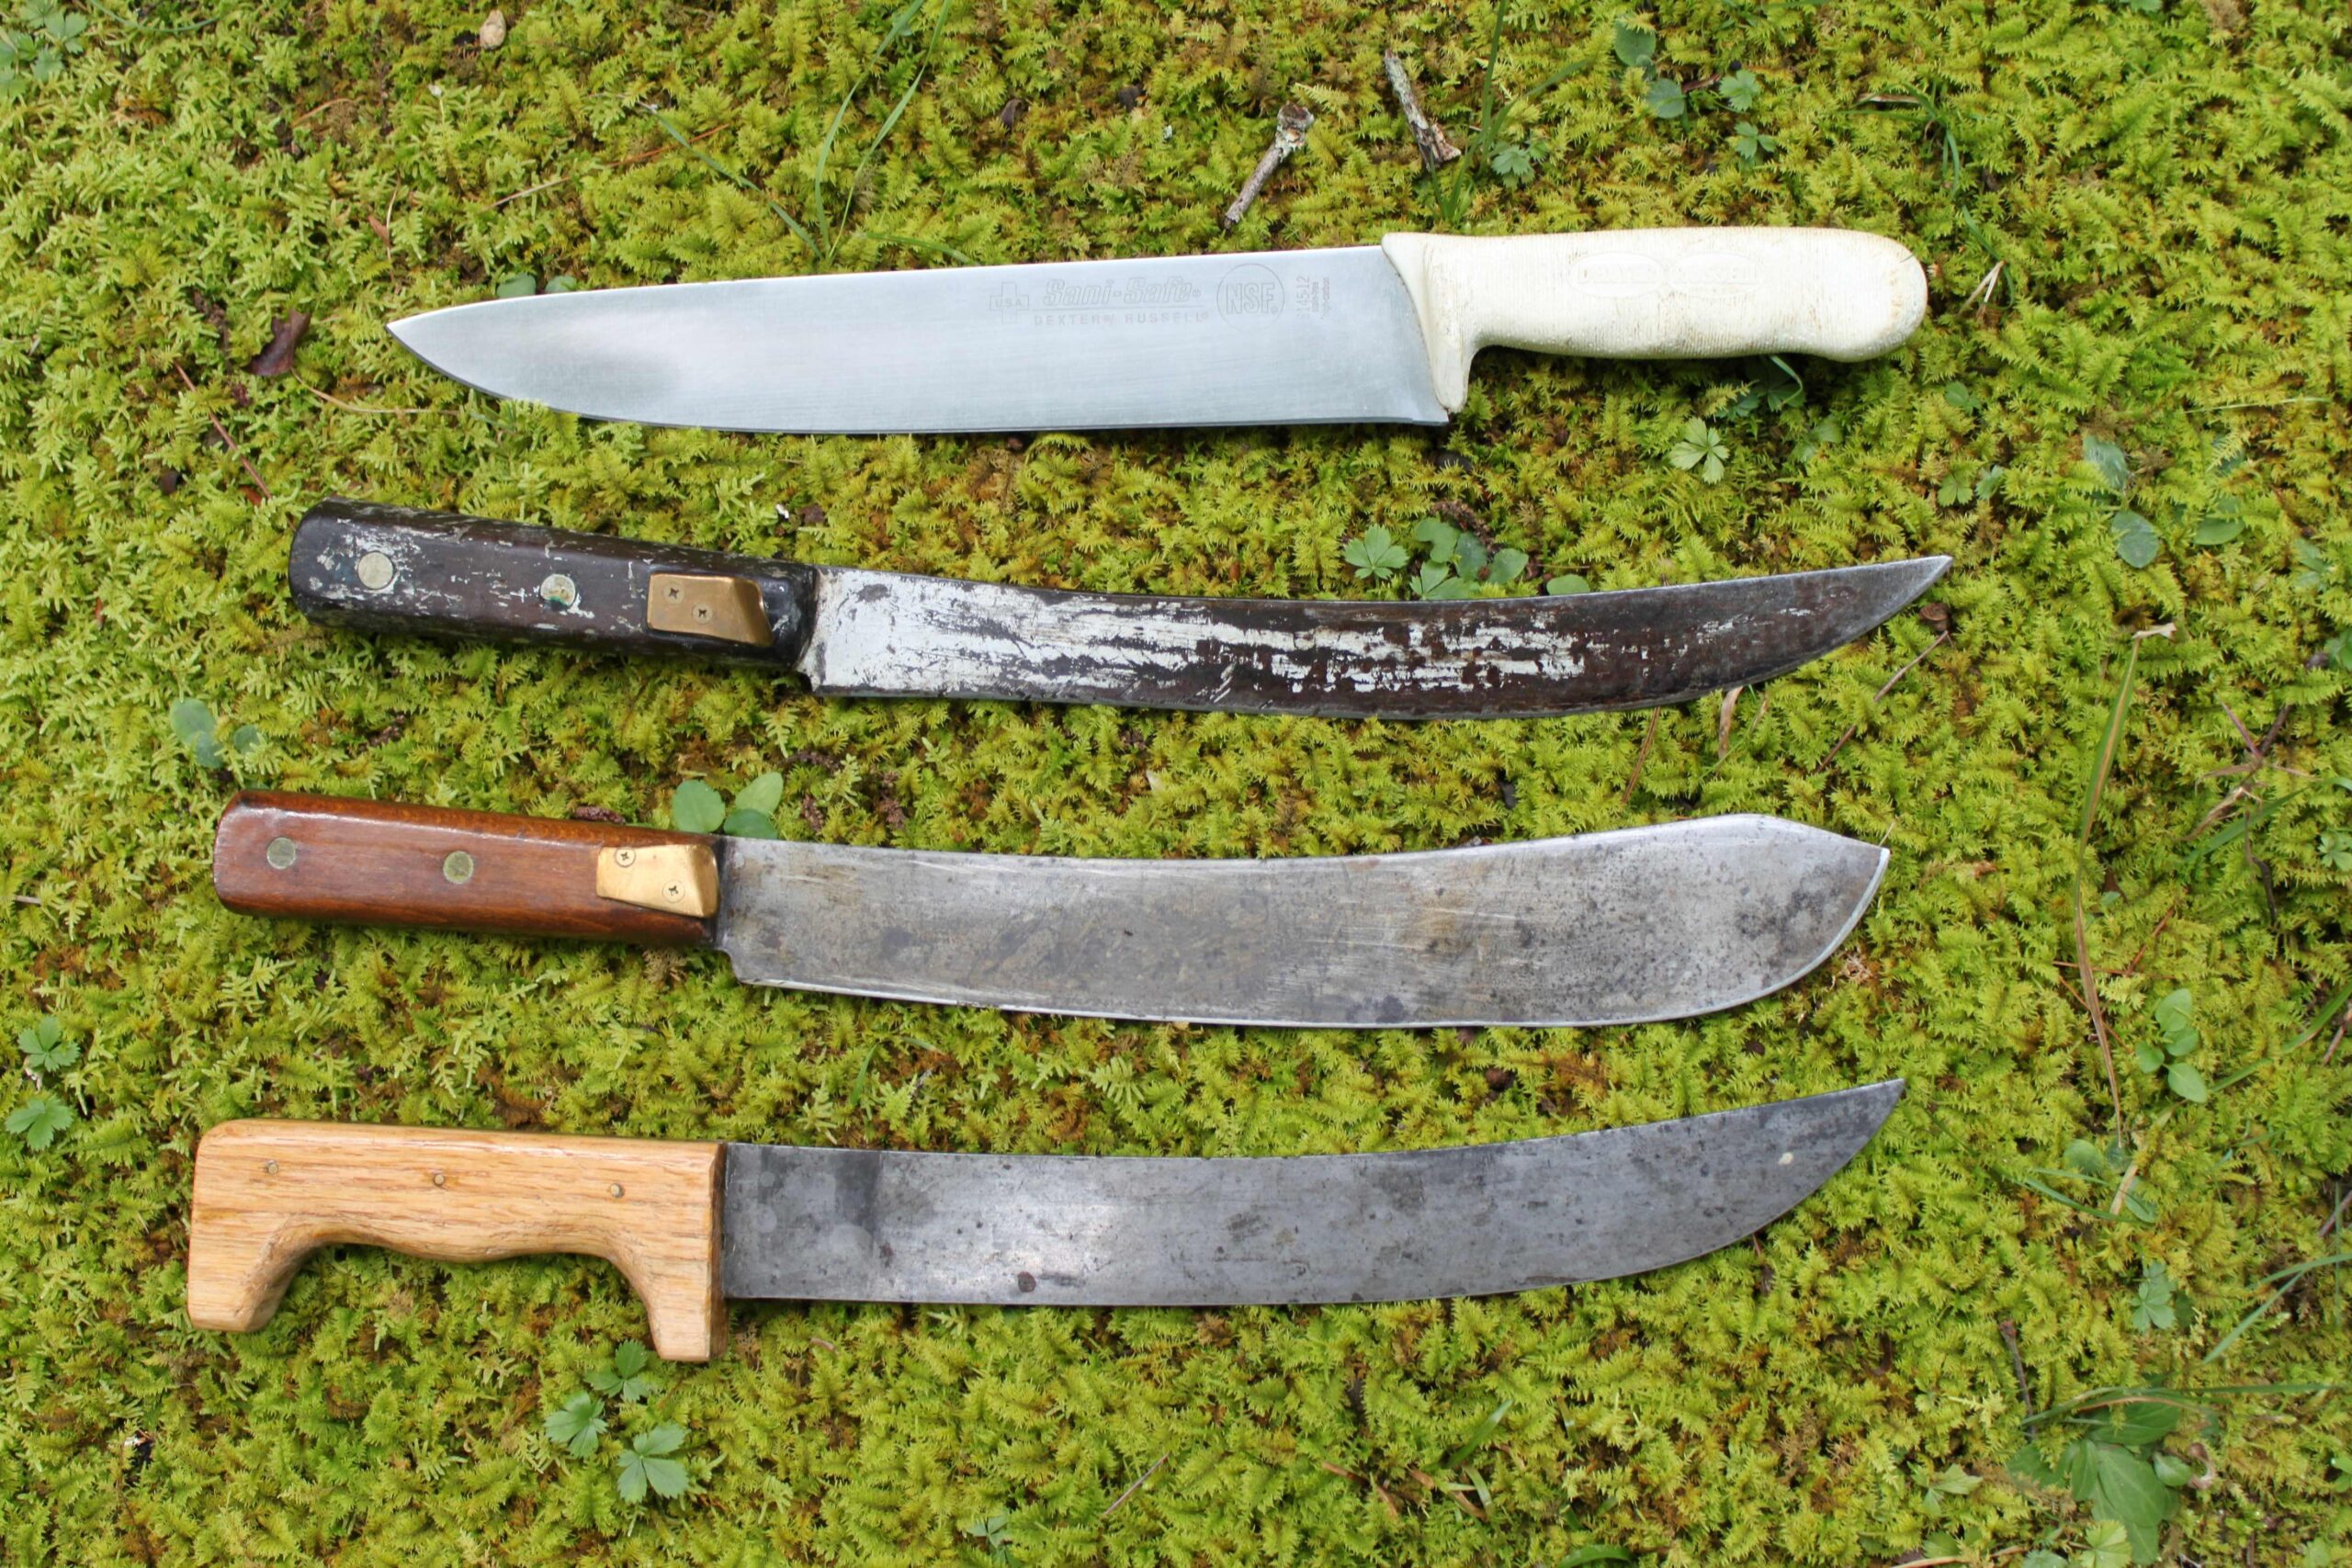 Big Knives for The Big Outdoors - TheGunMag - The Official Gun